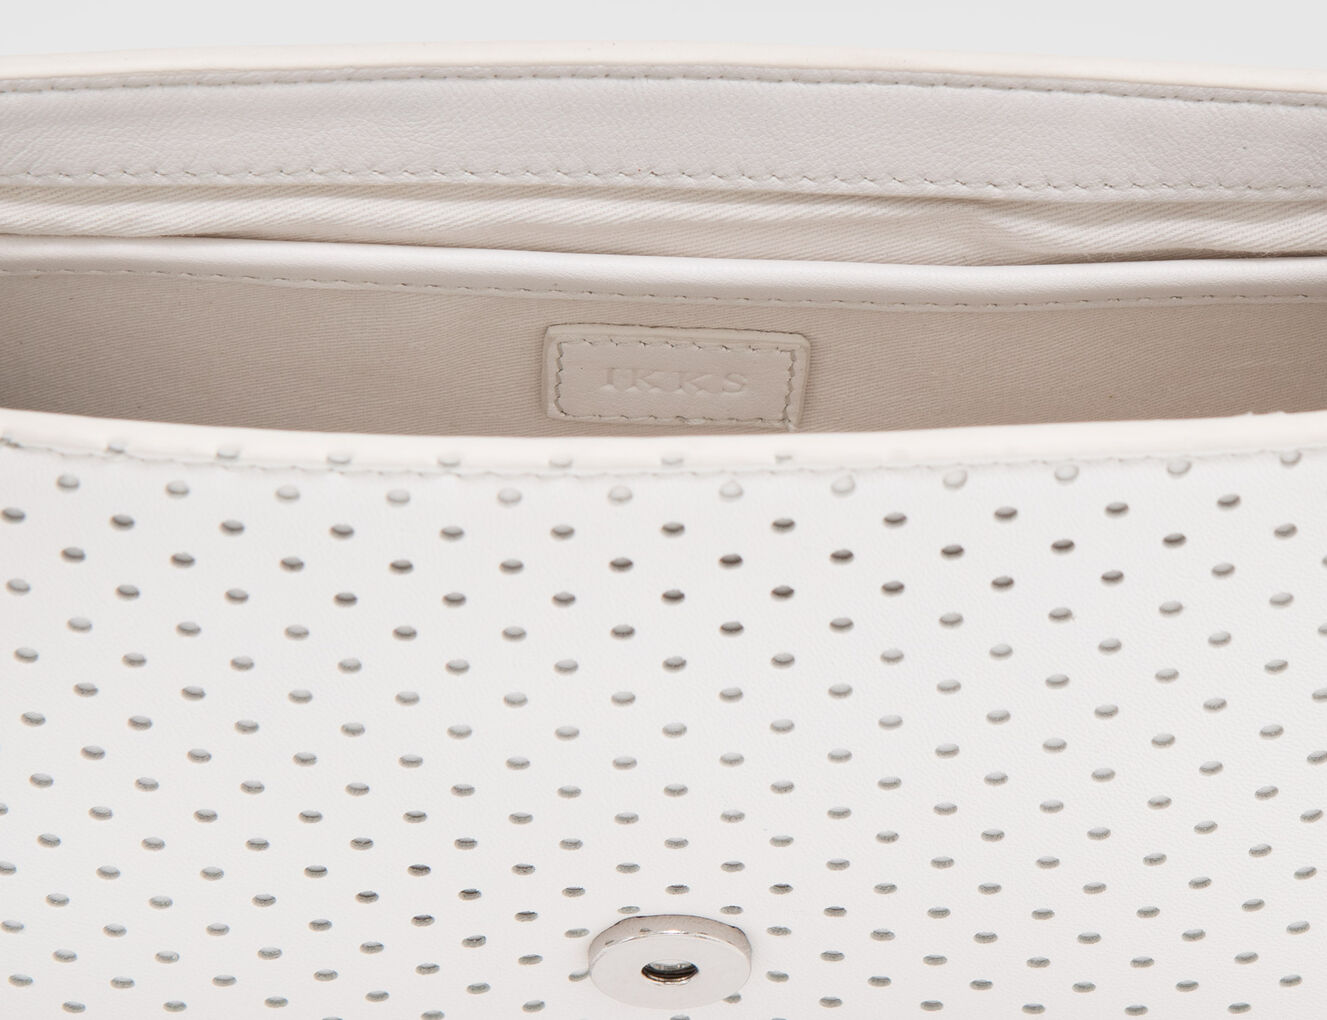 The 111 KINGSTON Women's white perforated leather bag - IKKS-5